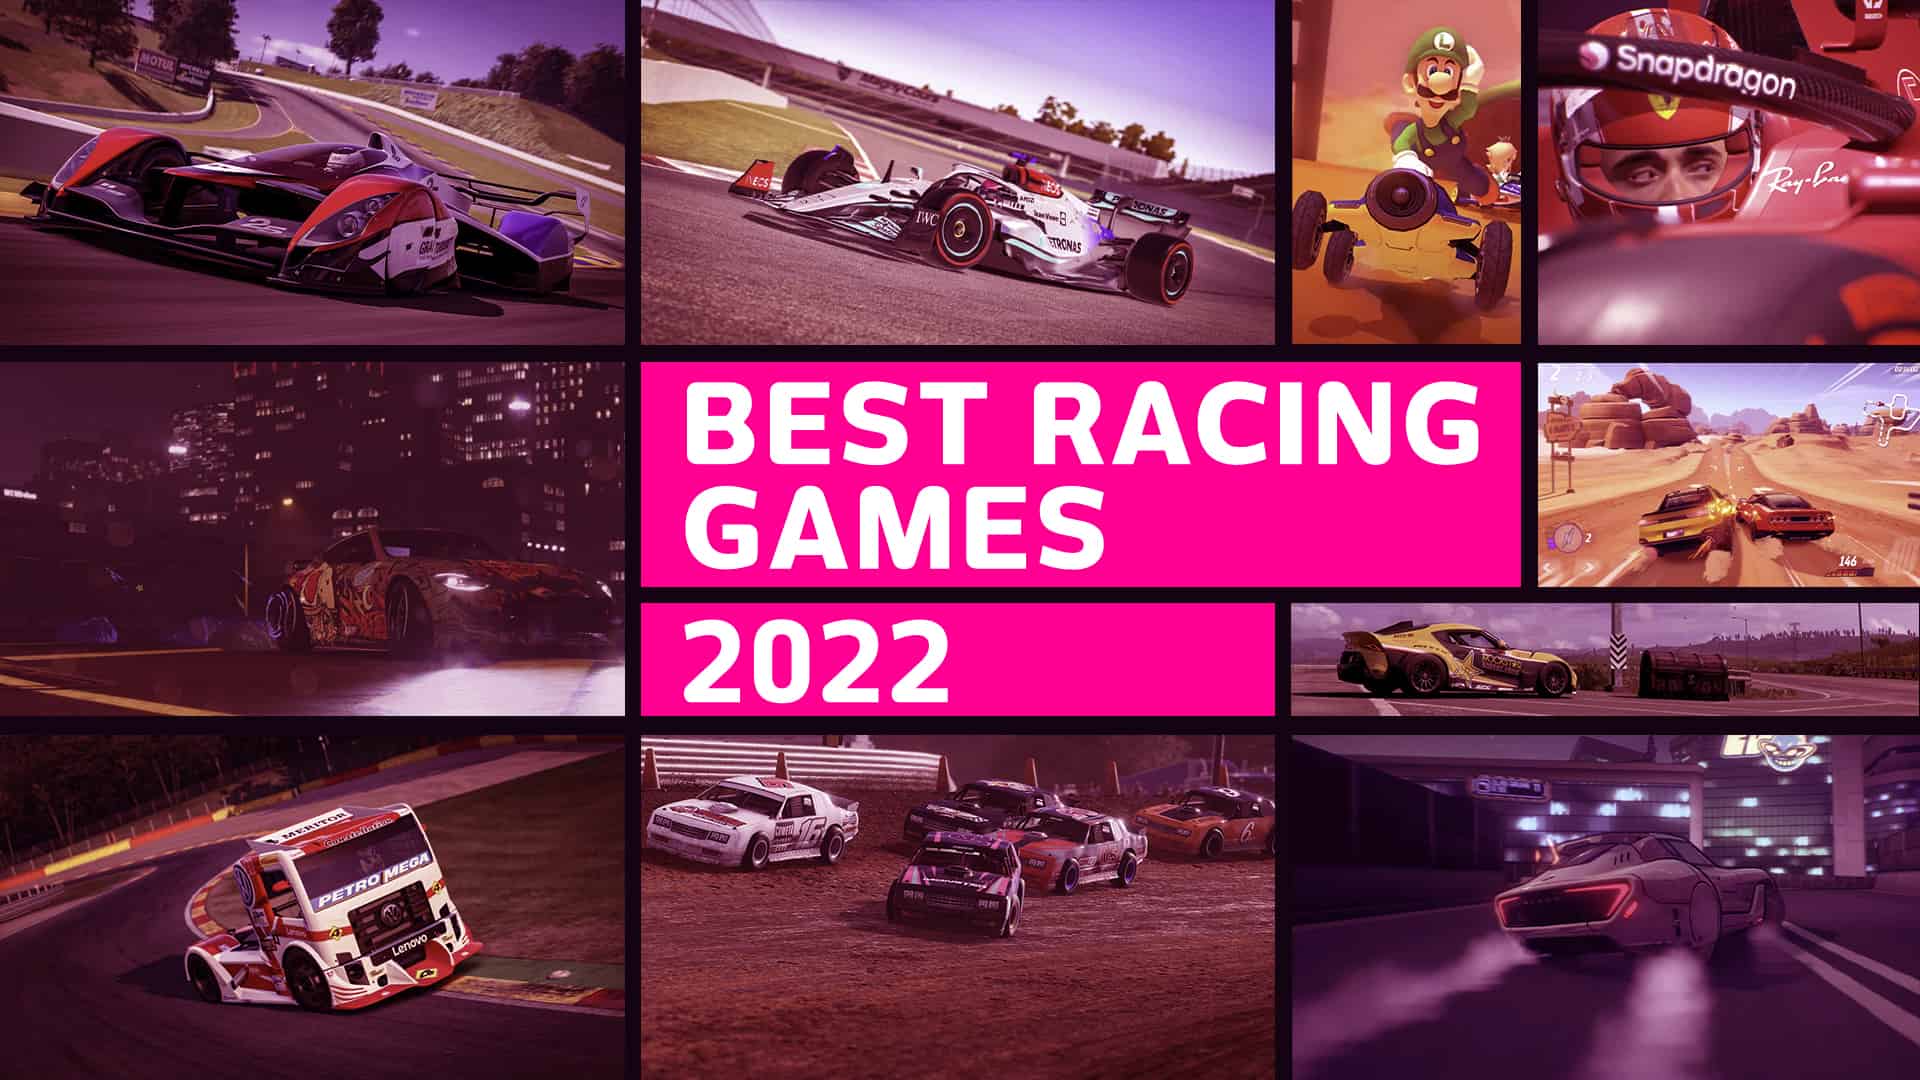 The Best Games of 2022